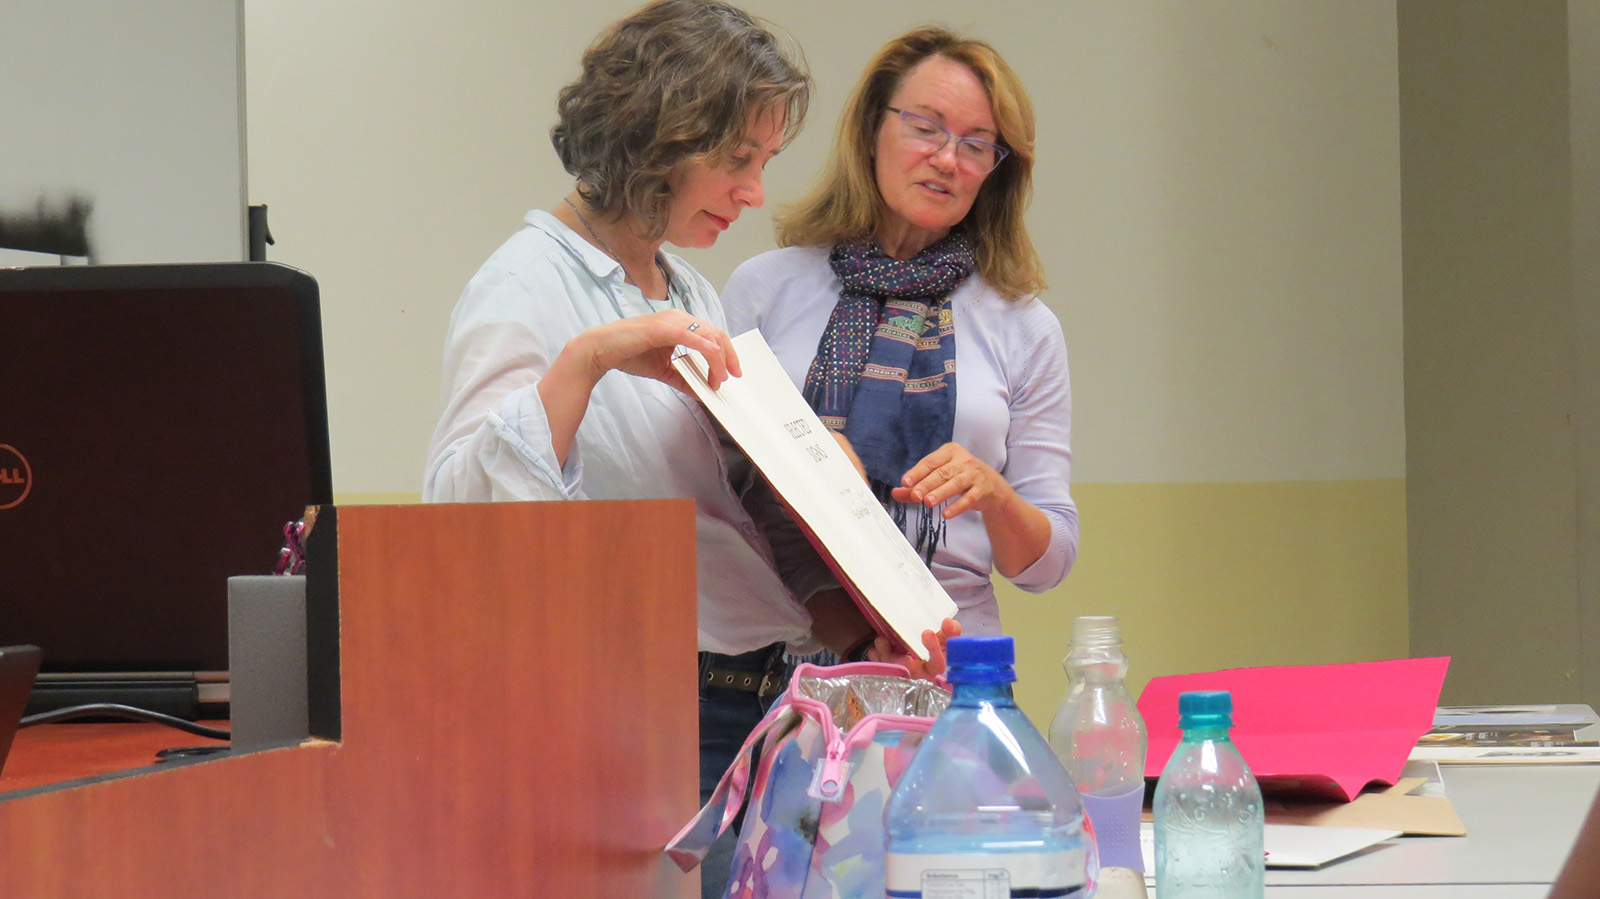 Click the image for a view of: Sue Gosin and Eliza Kentridge discussing Elizas book Selected Signs at the Department of Visual Arts Senior Student Seminar